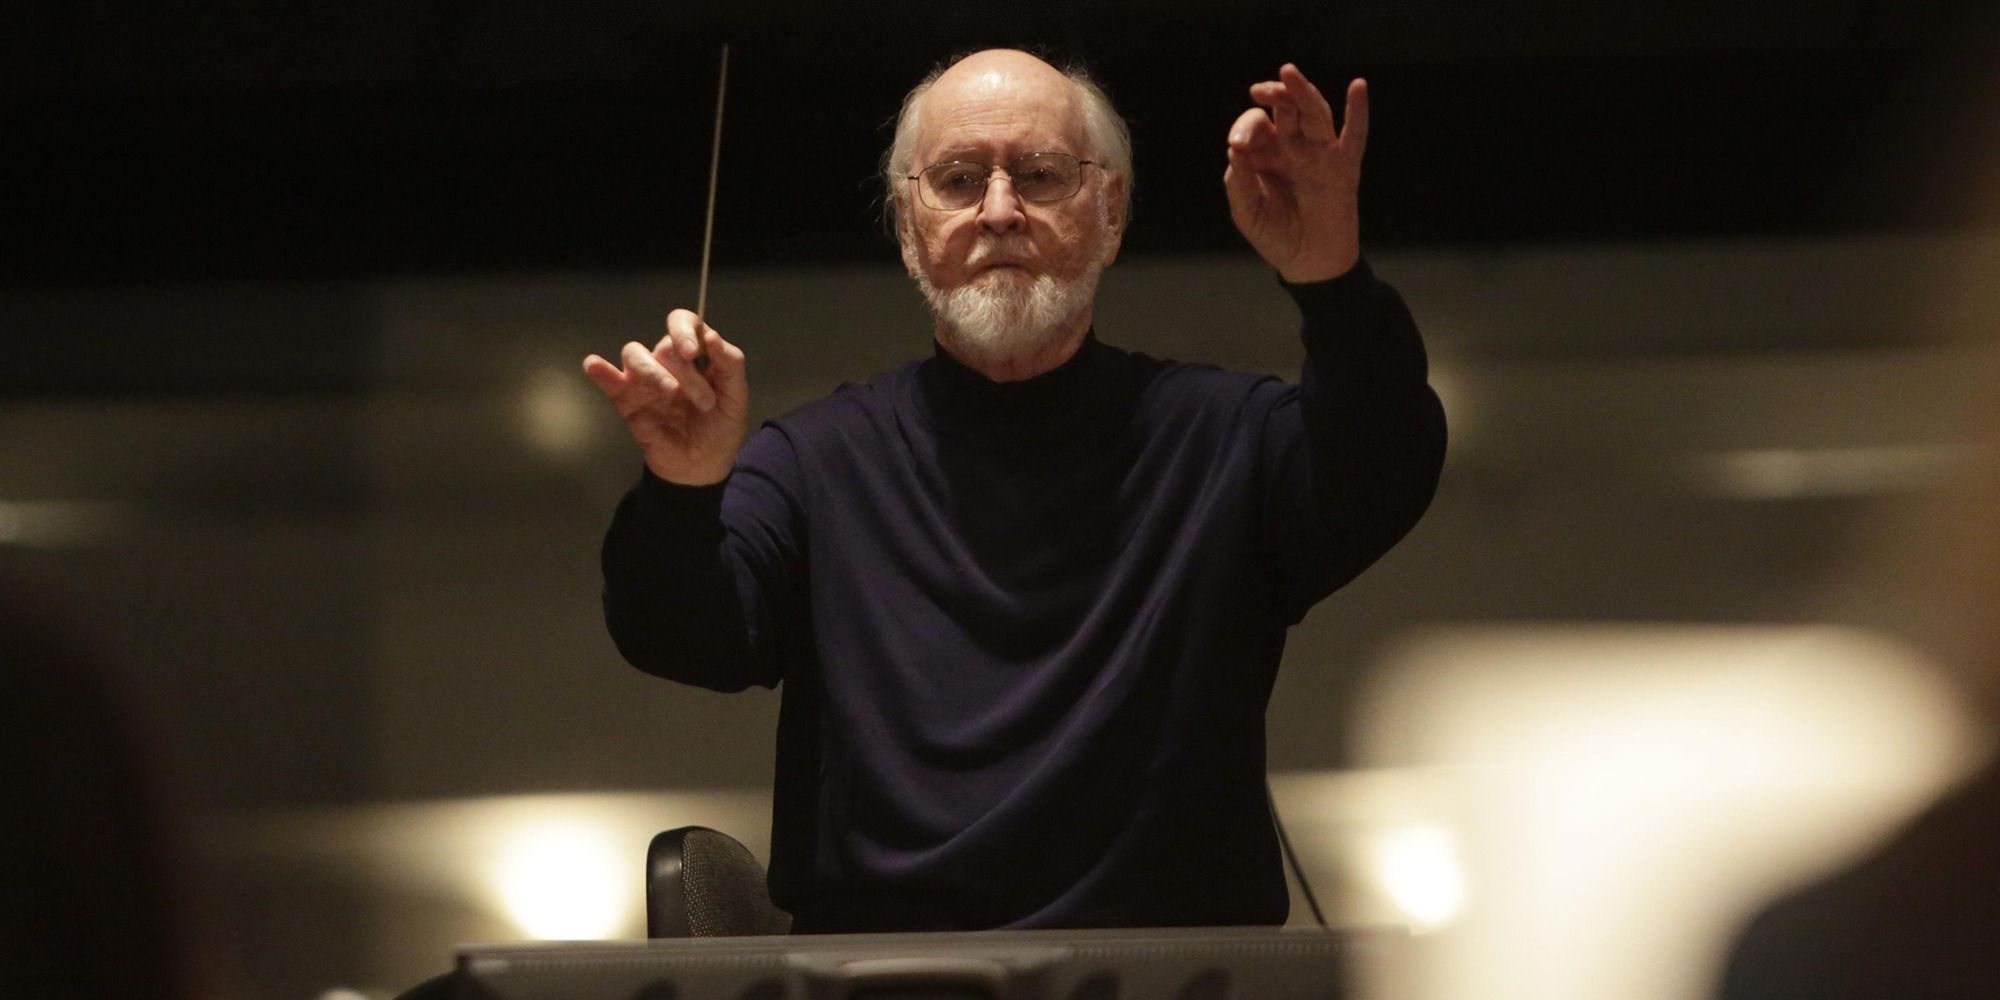 John Williams conducting in front of a blurry background